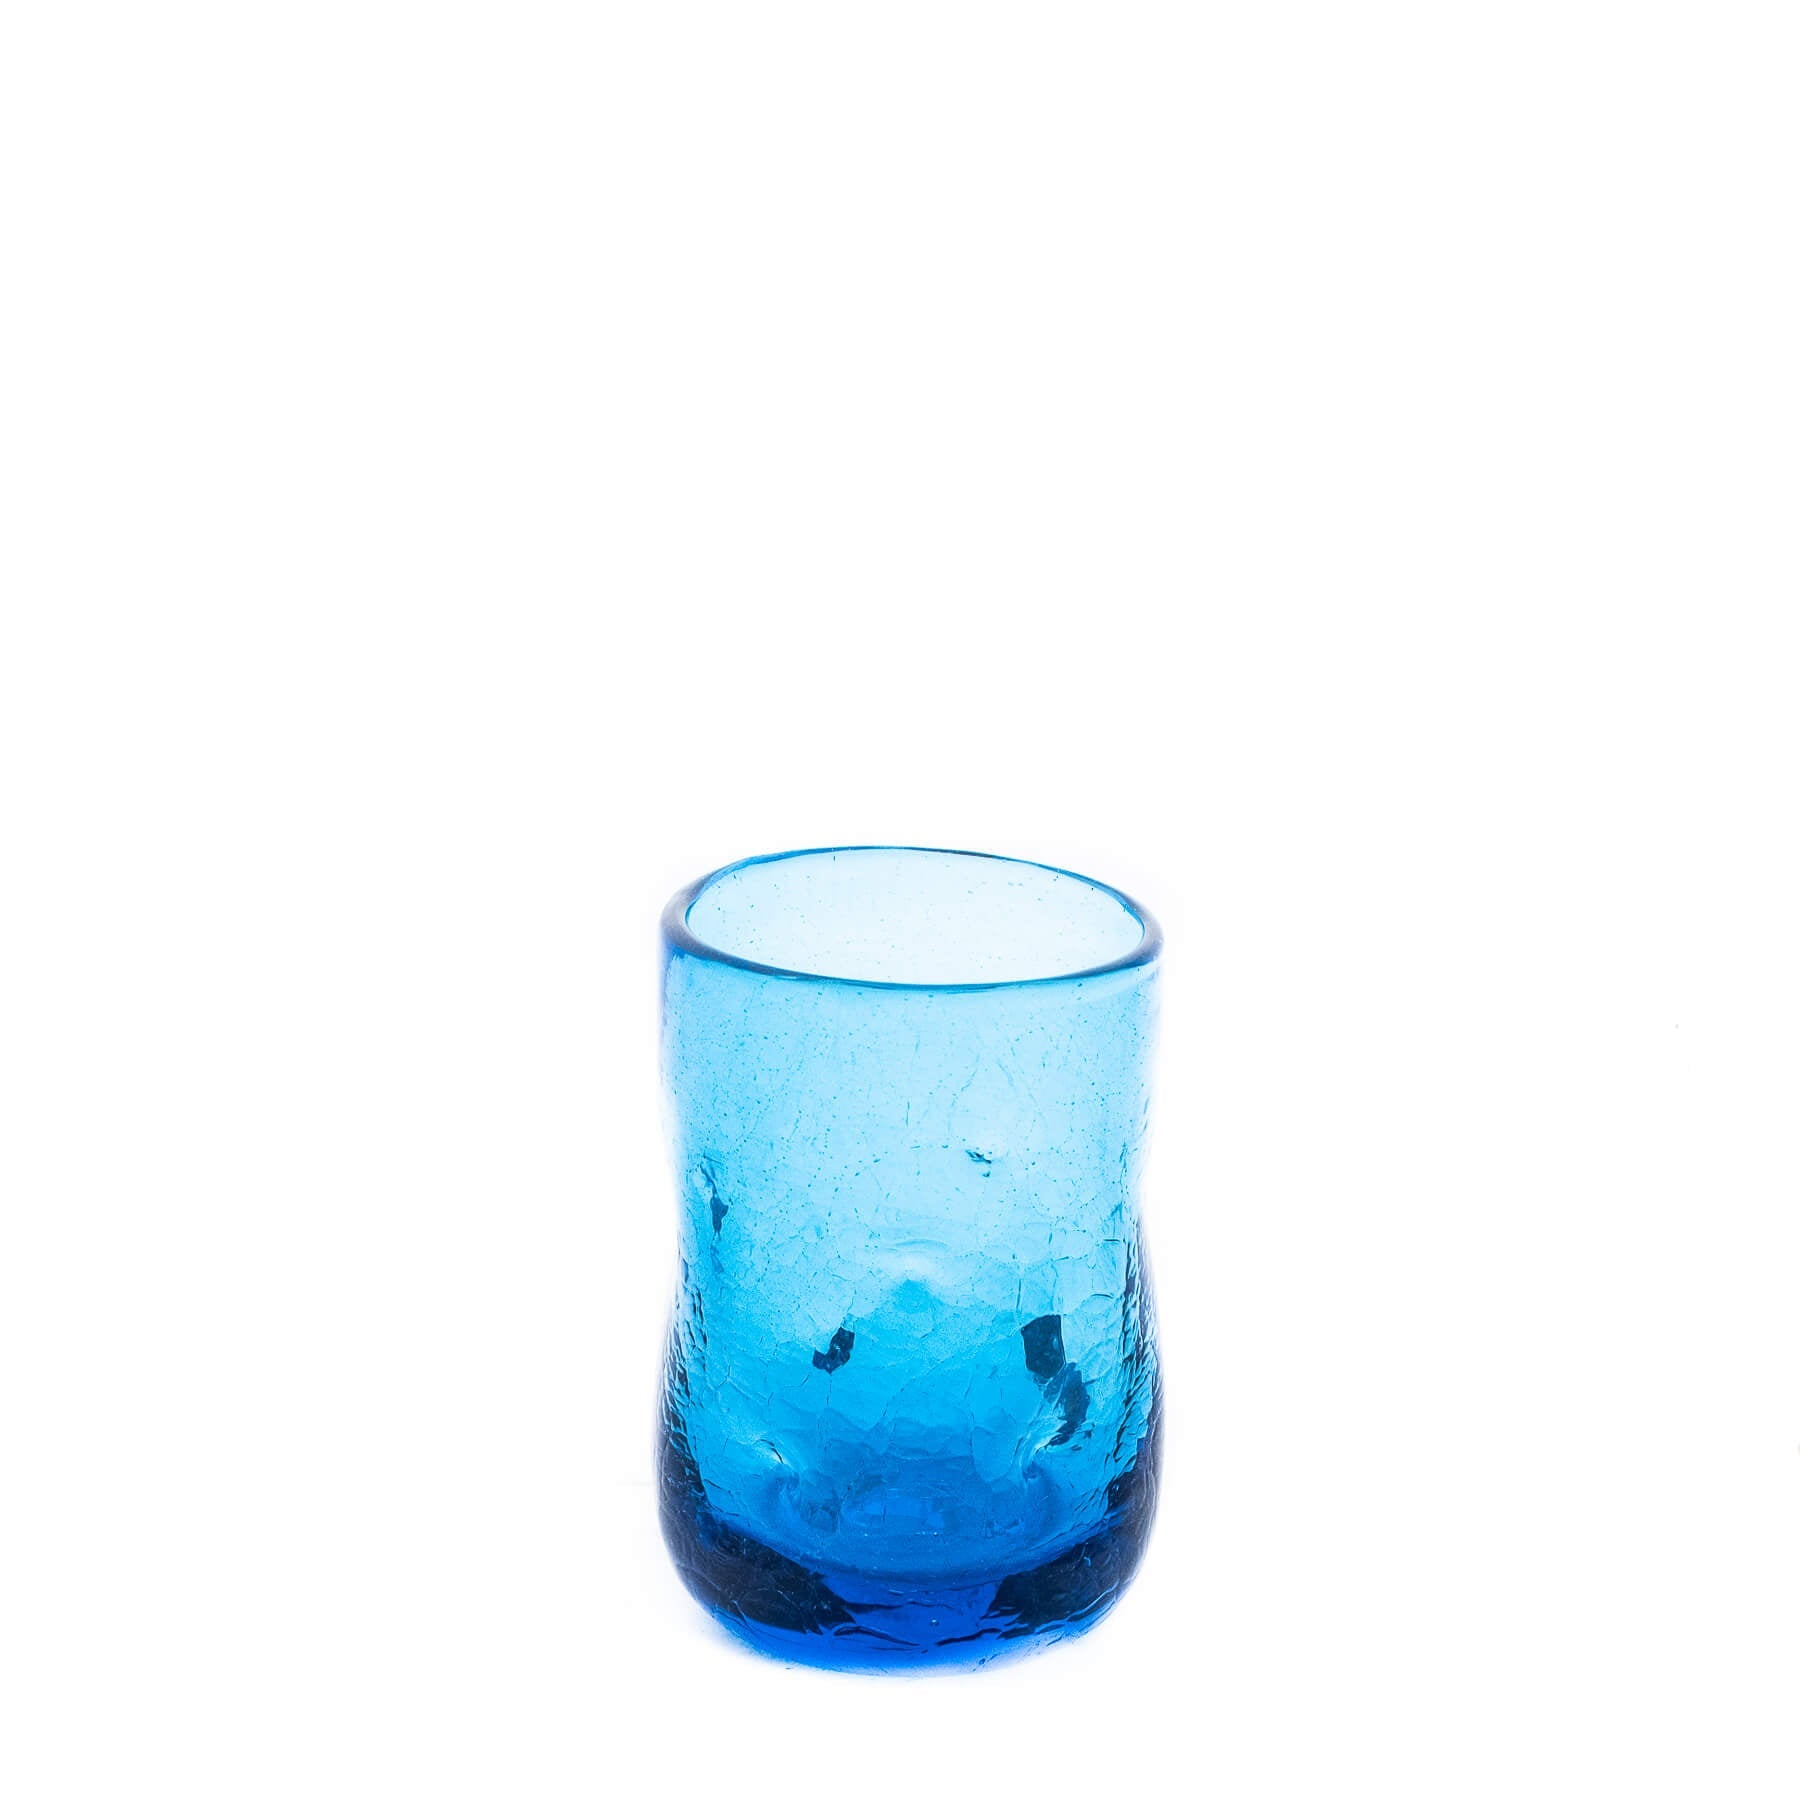 Product photo for Blenko 418SC Crackled Small Dimple Glass - Turquoise